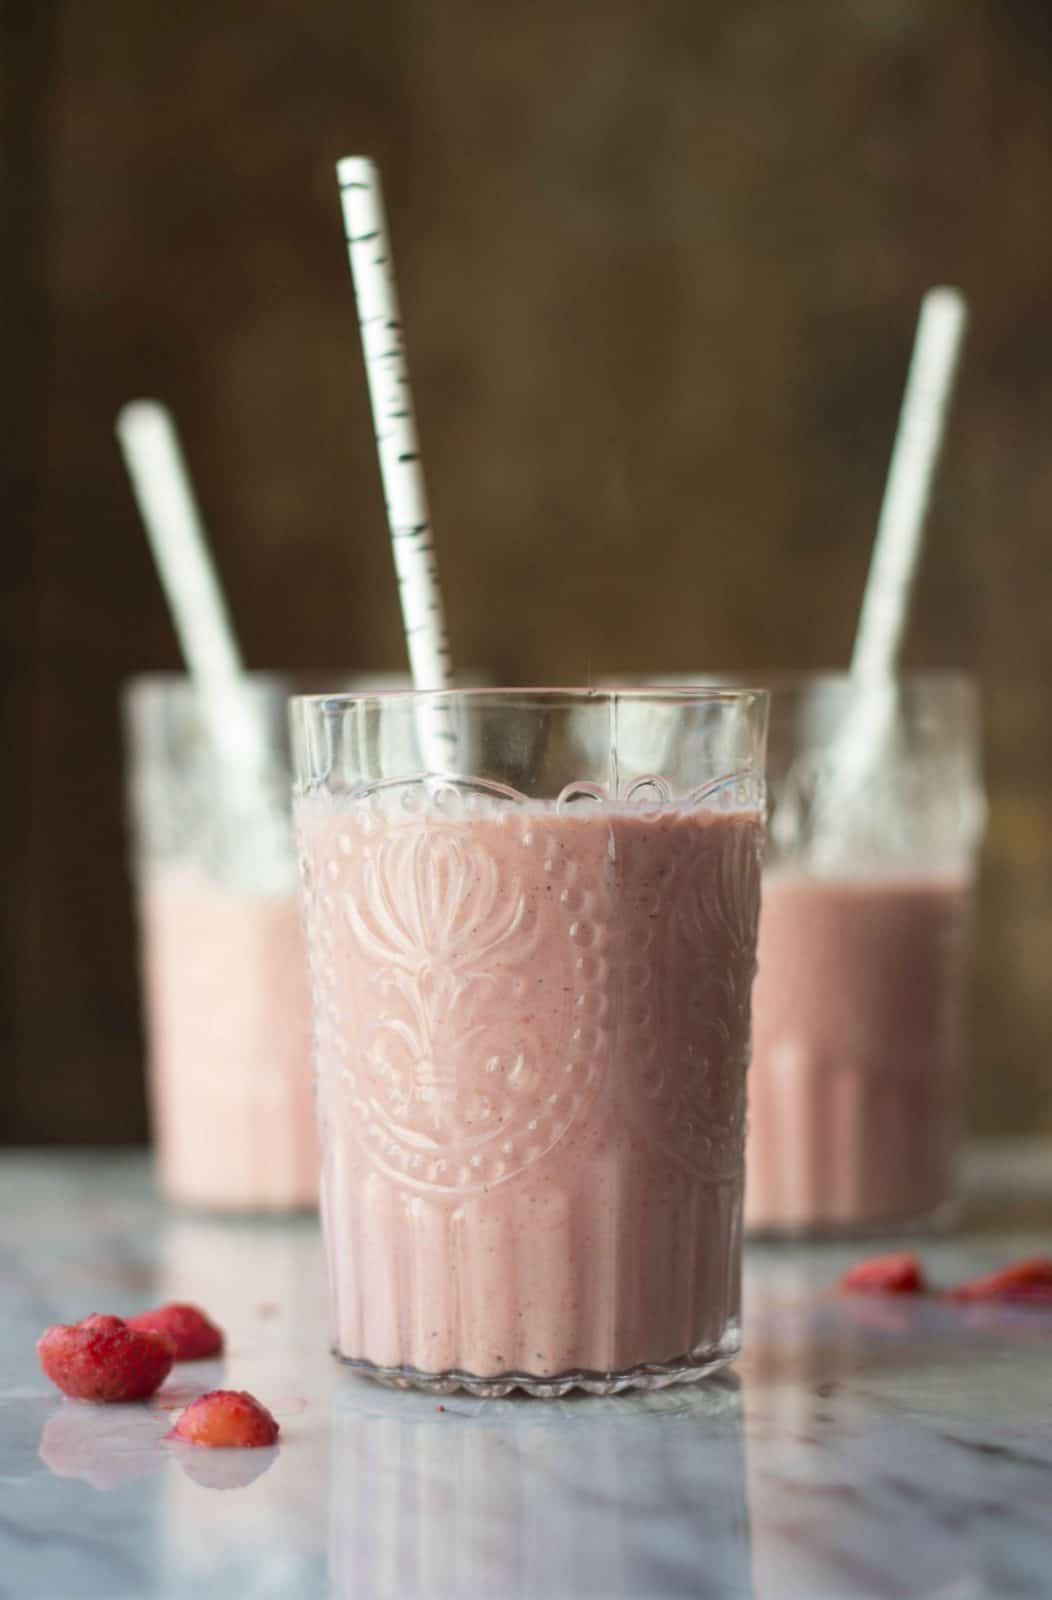 A side shot of a strawberry cashew smoothie.